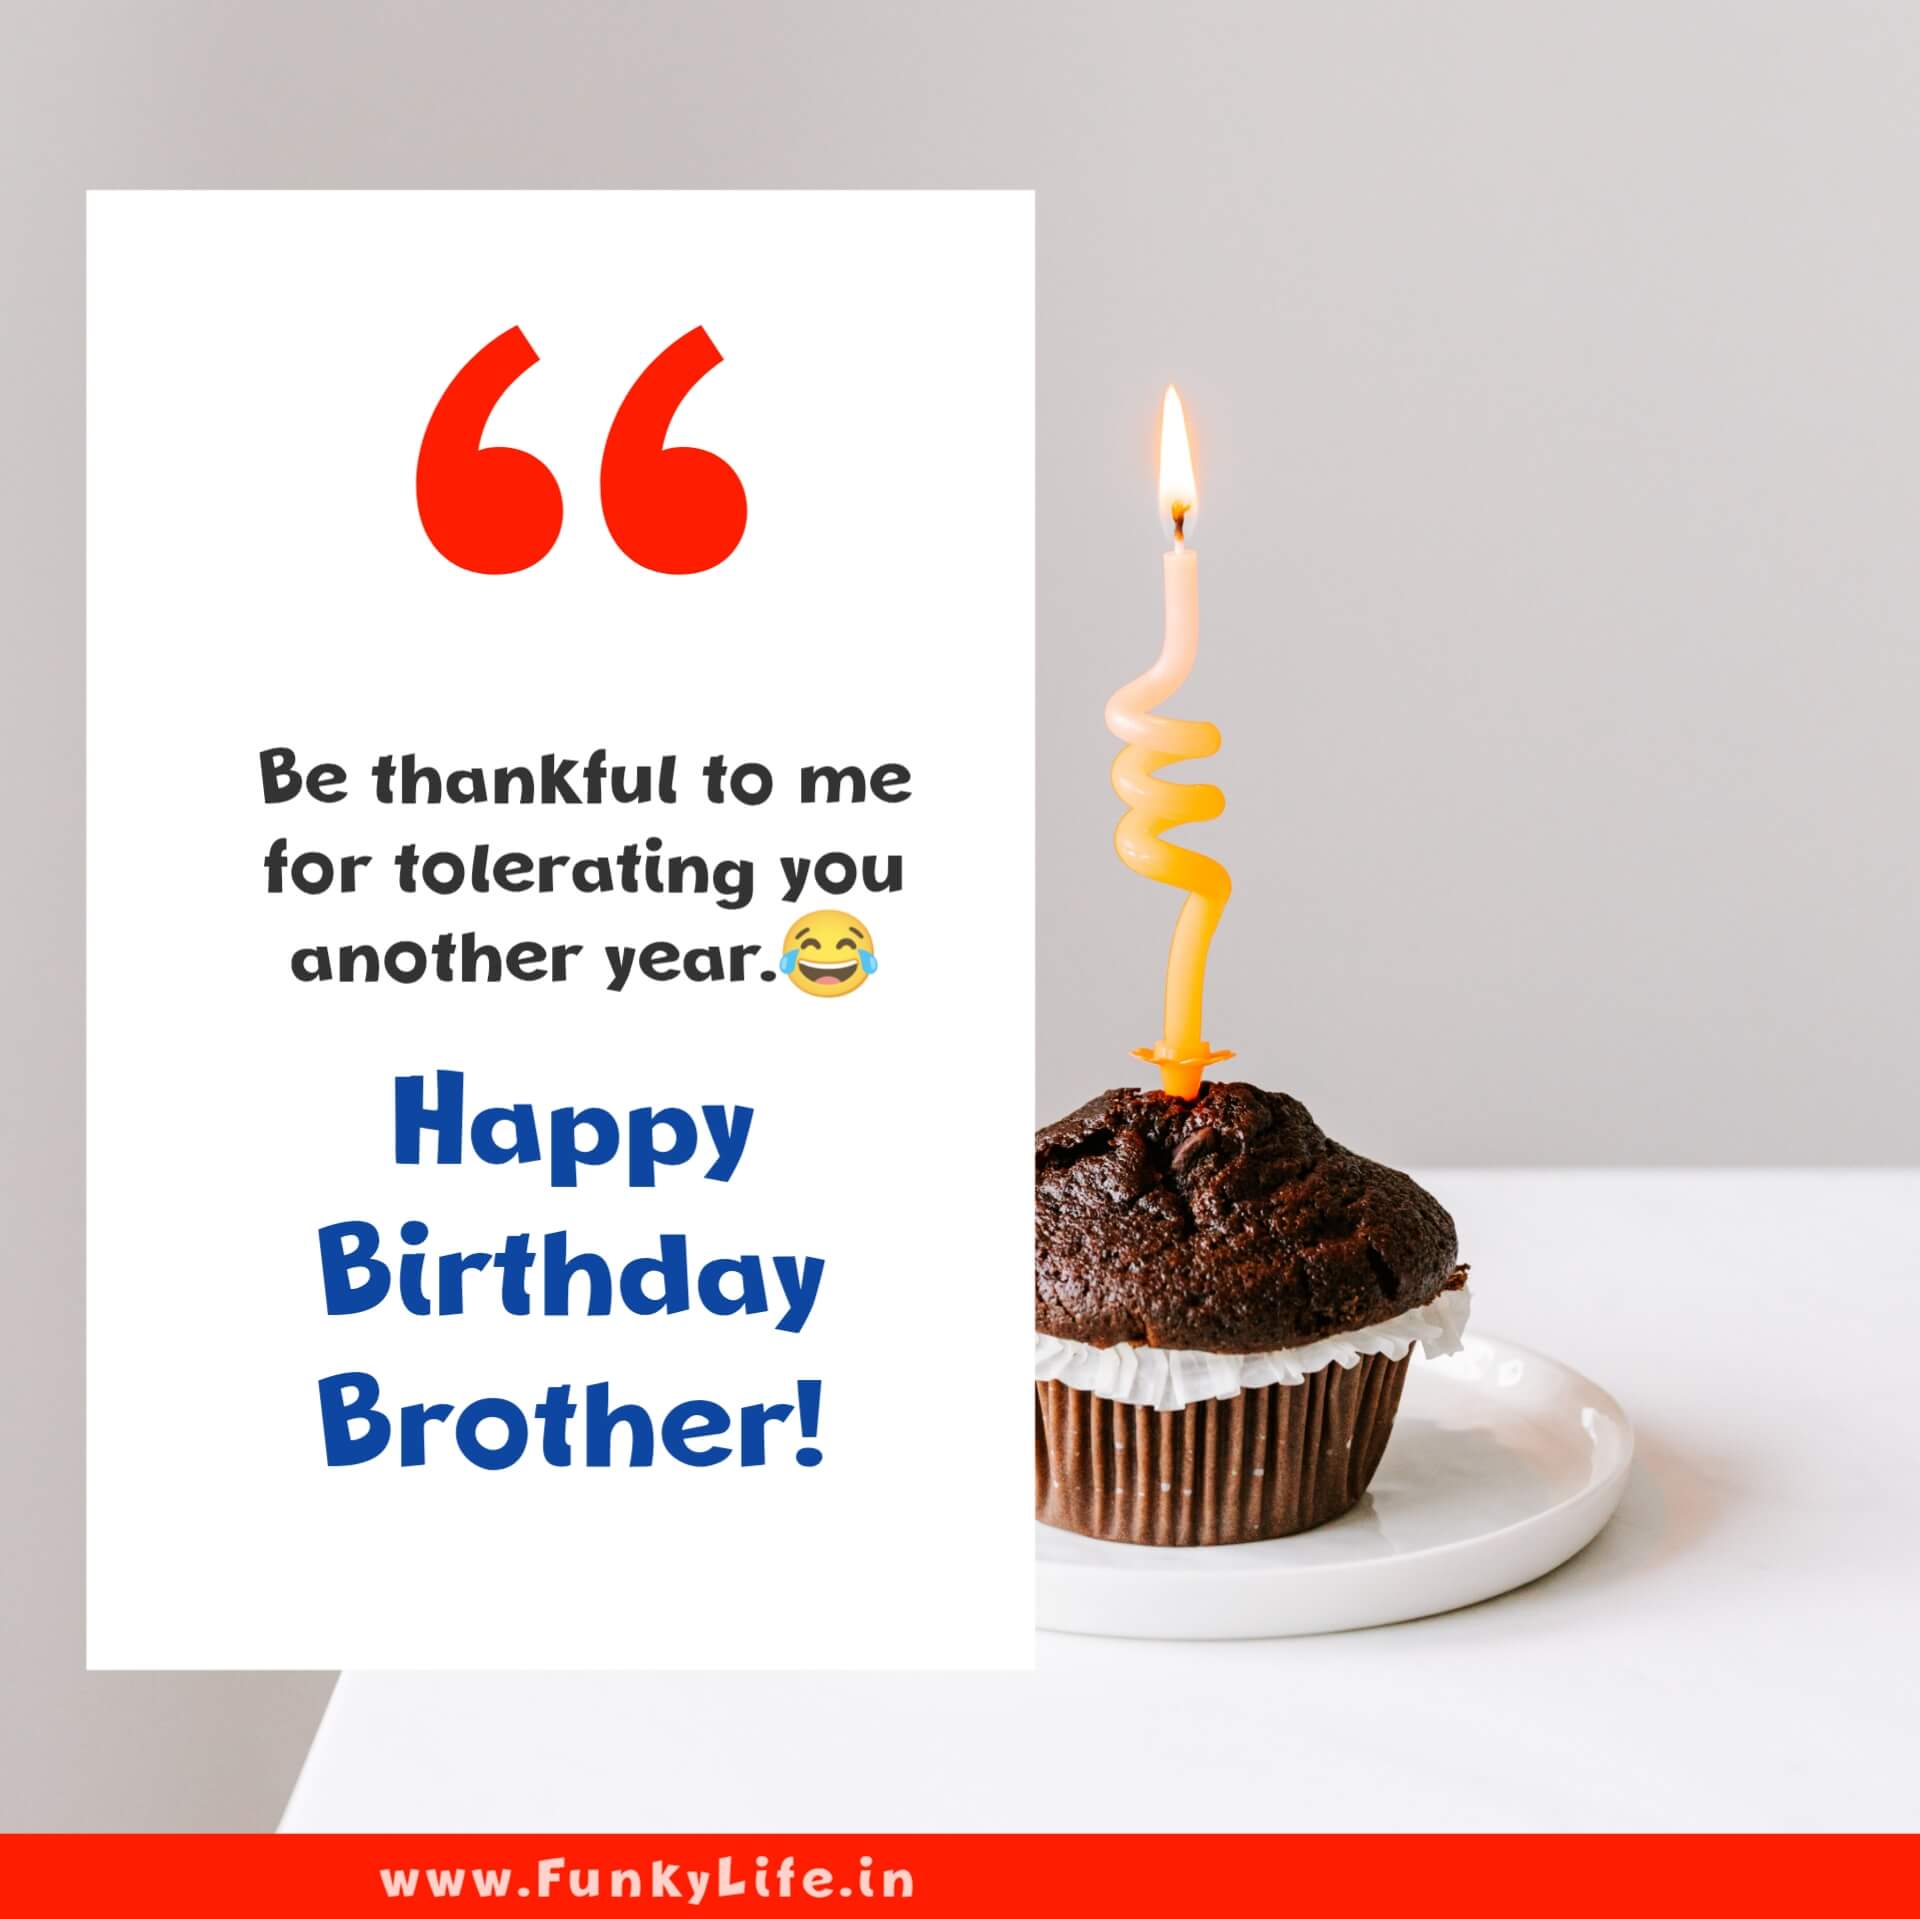 Funny Birthday Wishes for Your Brother